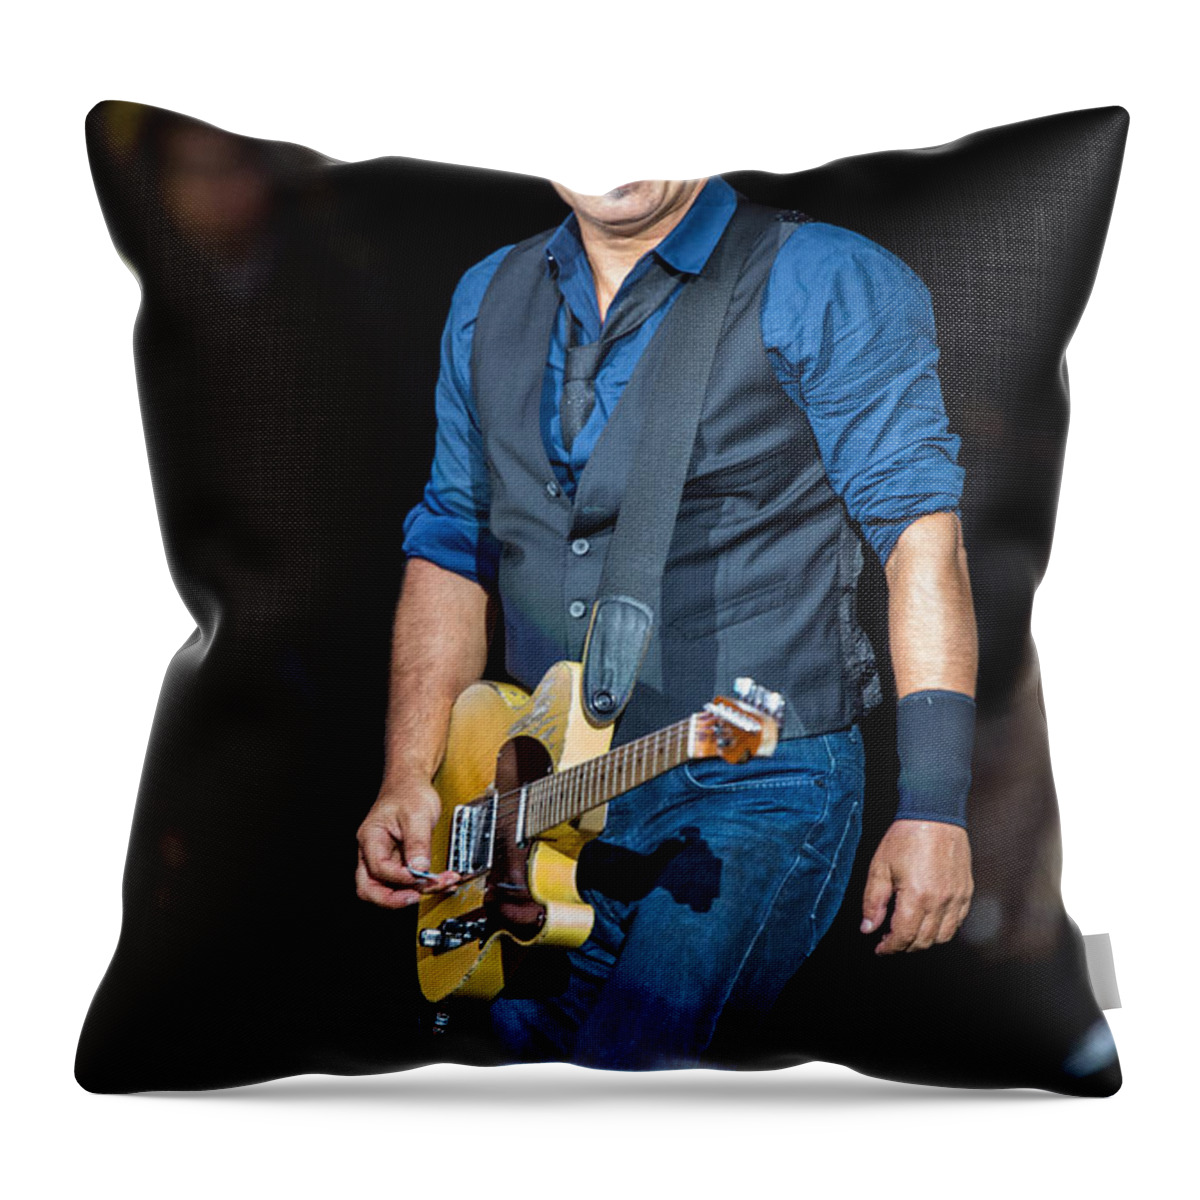 Bruce Springsteen Throw Pillow featuring the photograph Bruce Springsteen by Georgia Fowler